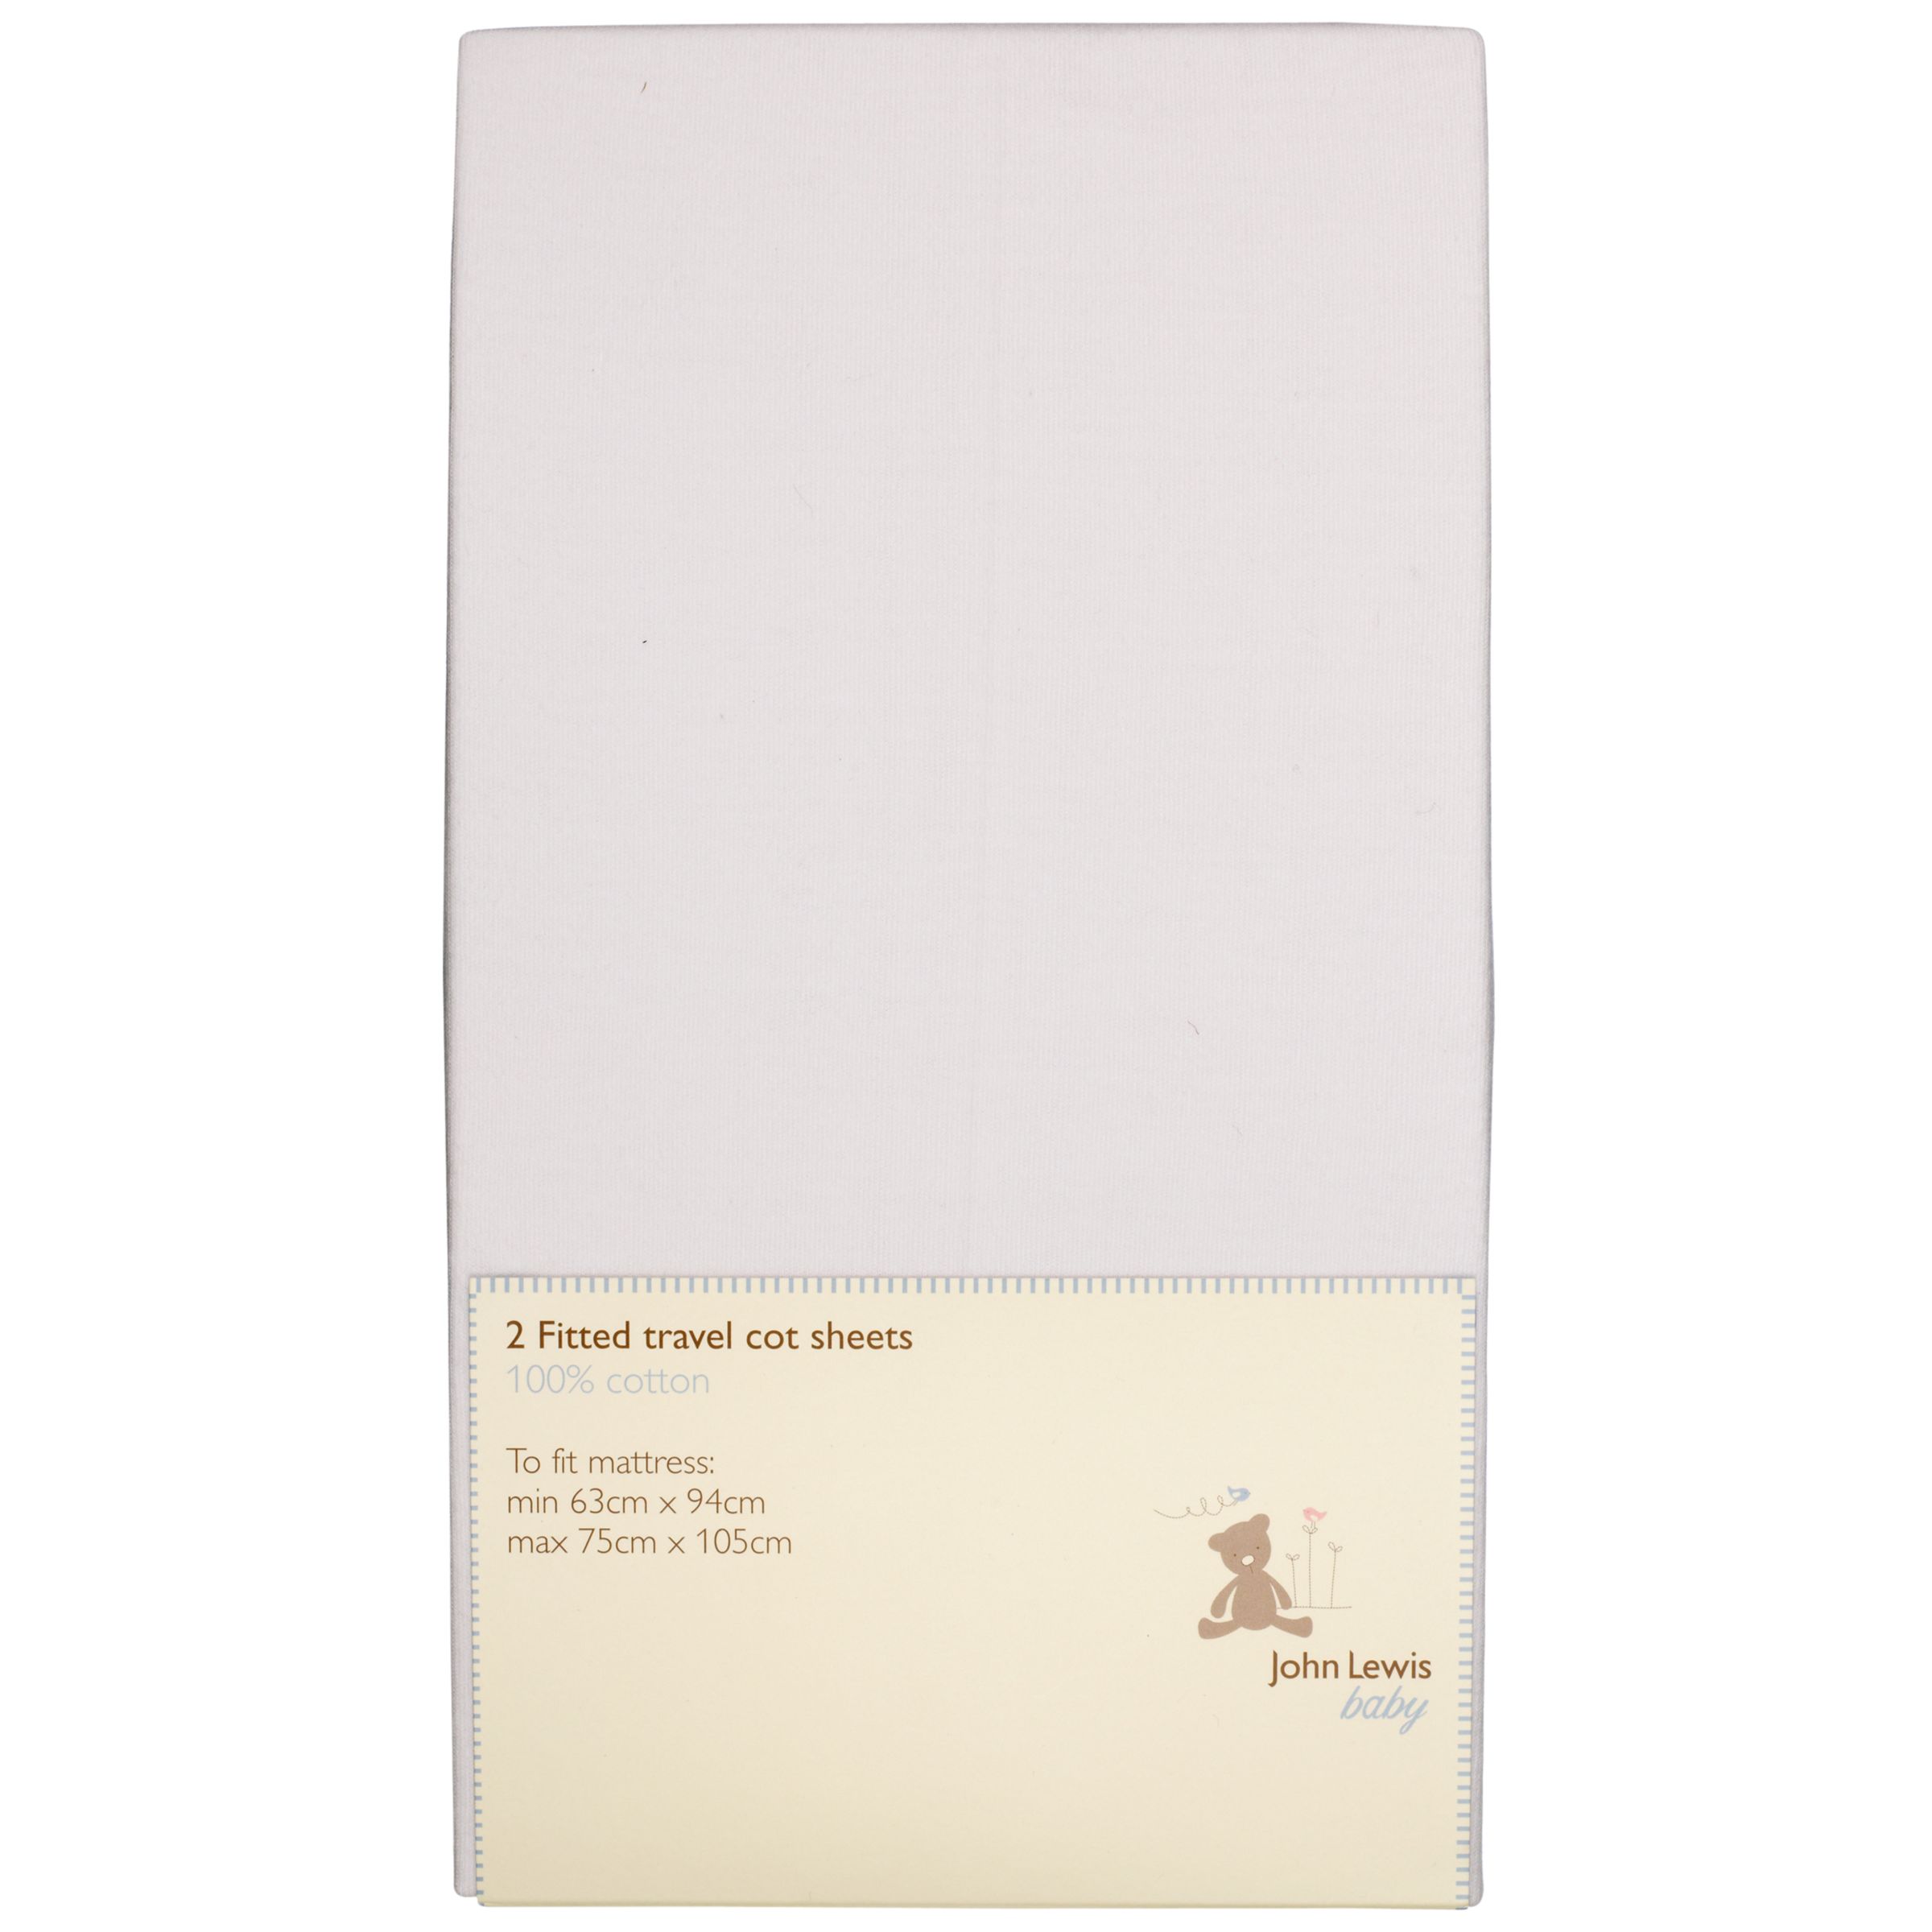 John Lewis Baby Fitted Travel Cot Sheets, 63-75